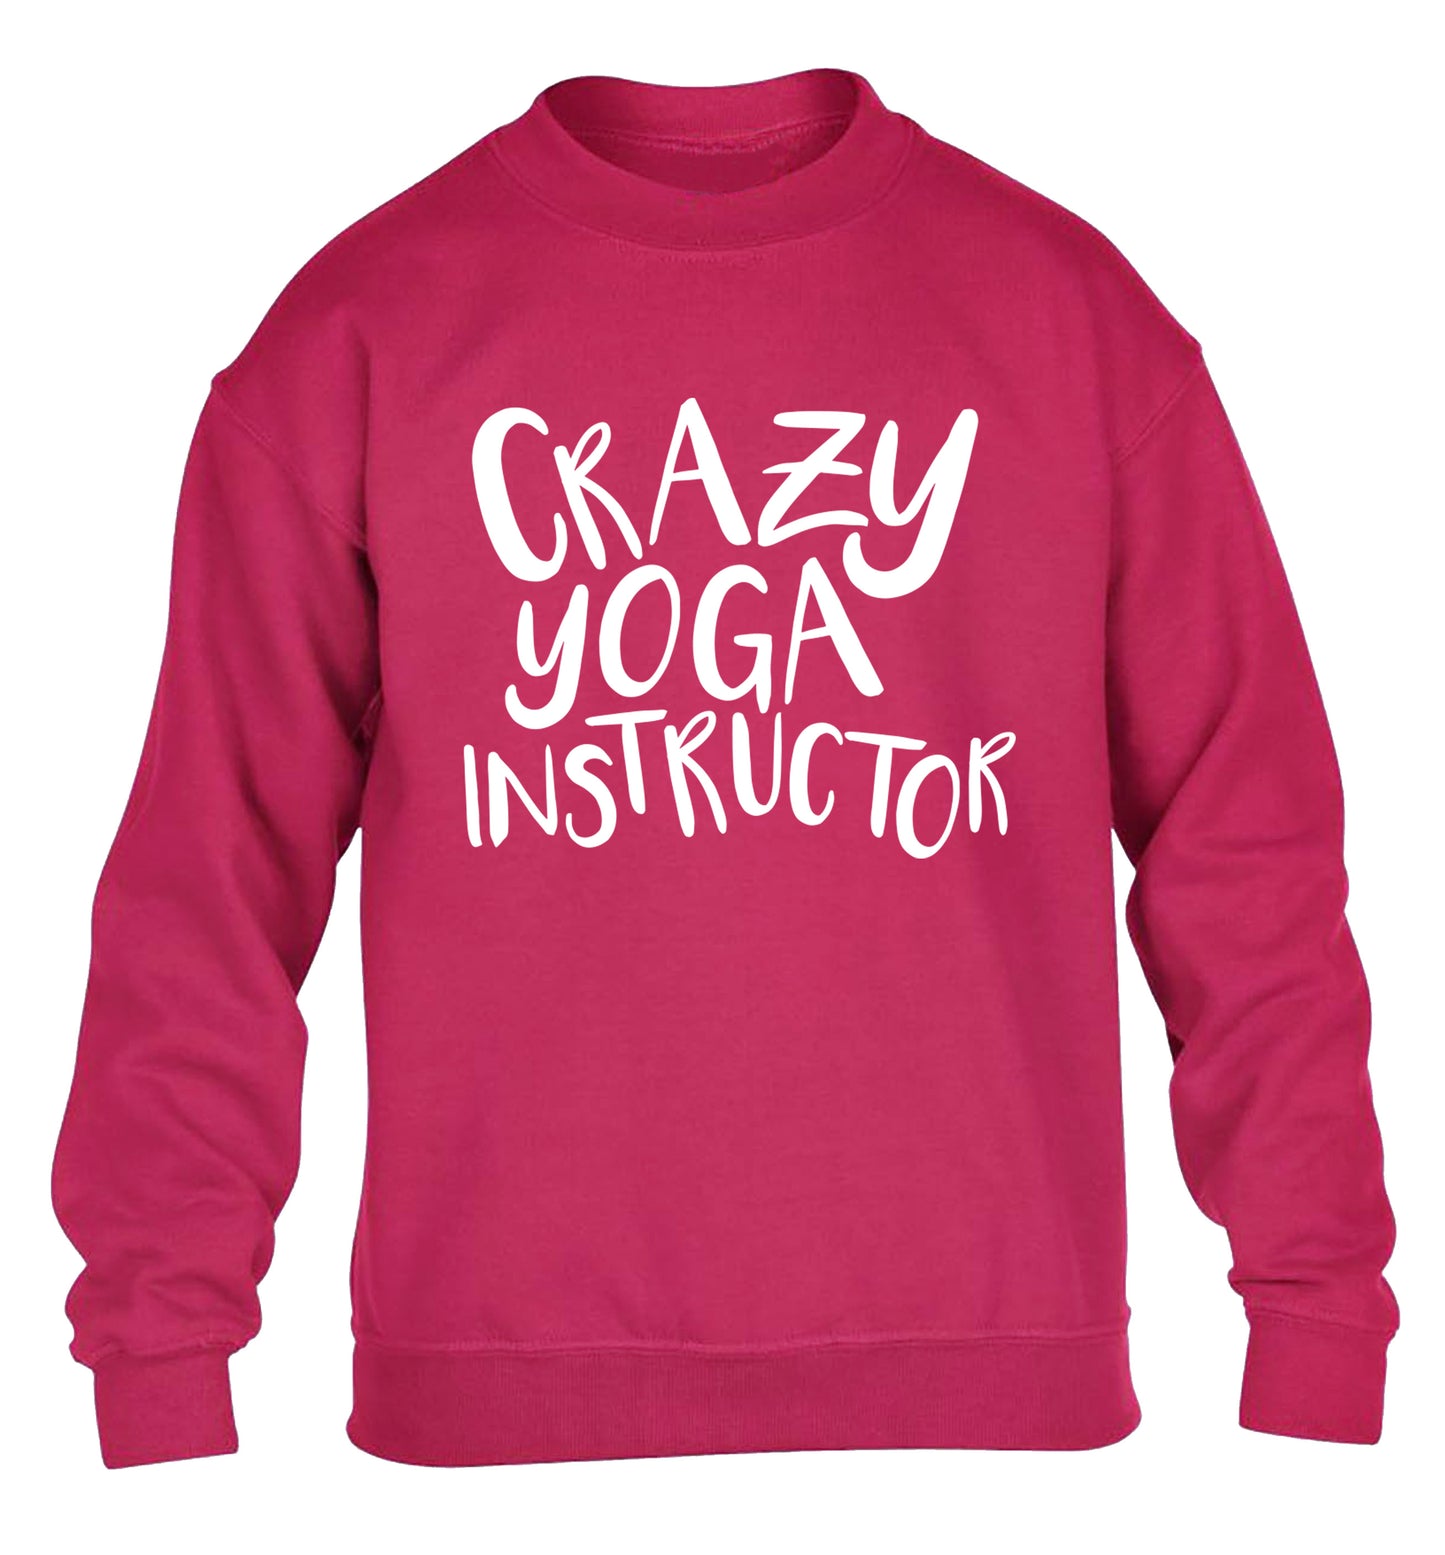 Crazy yoga instructor children's pink sweater 12-13 Years